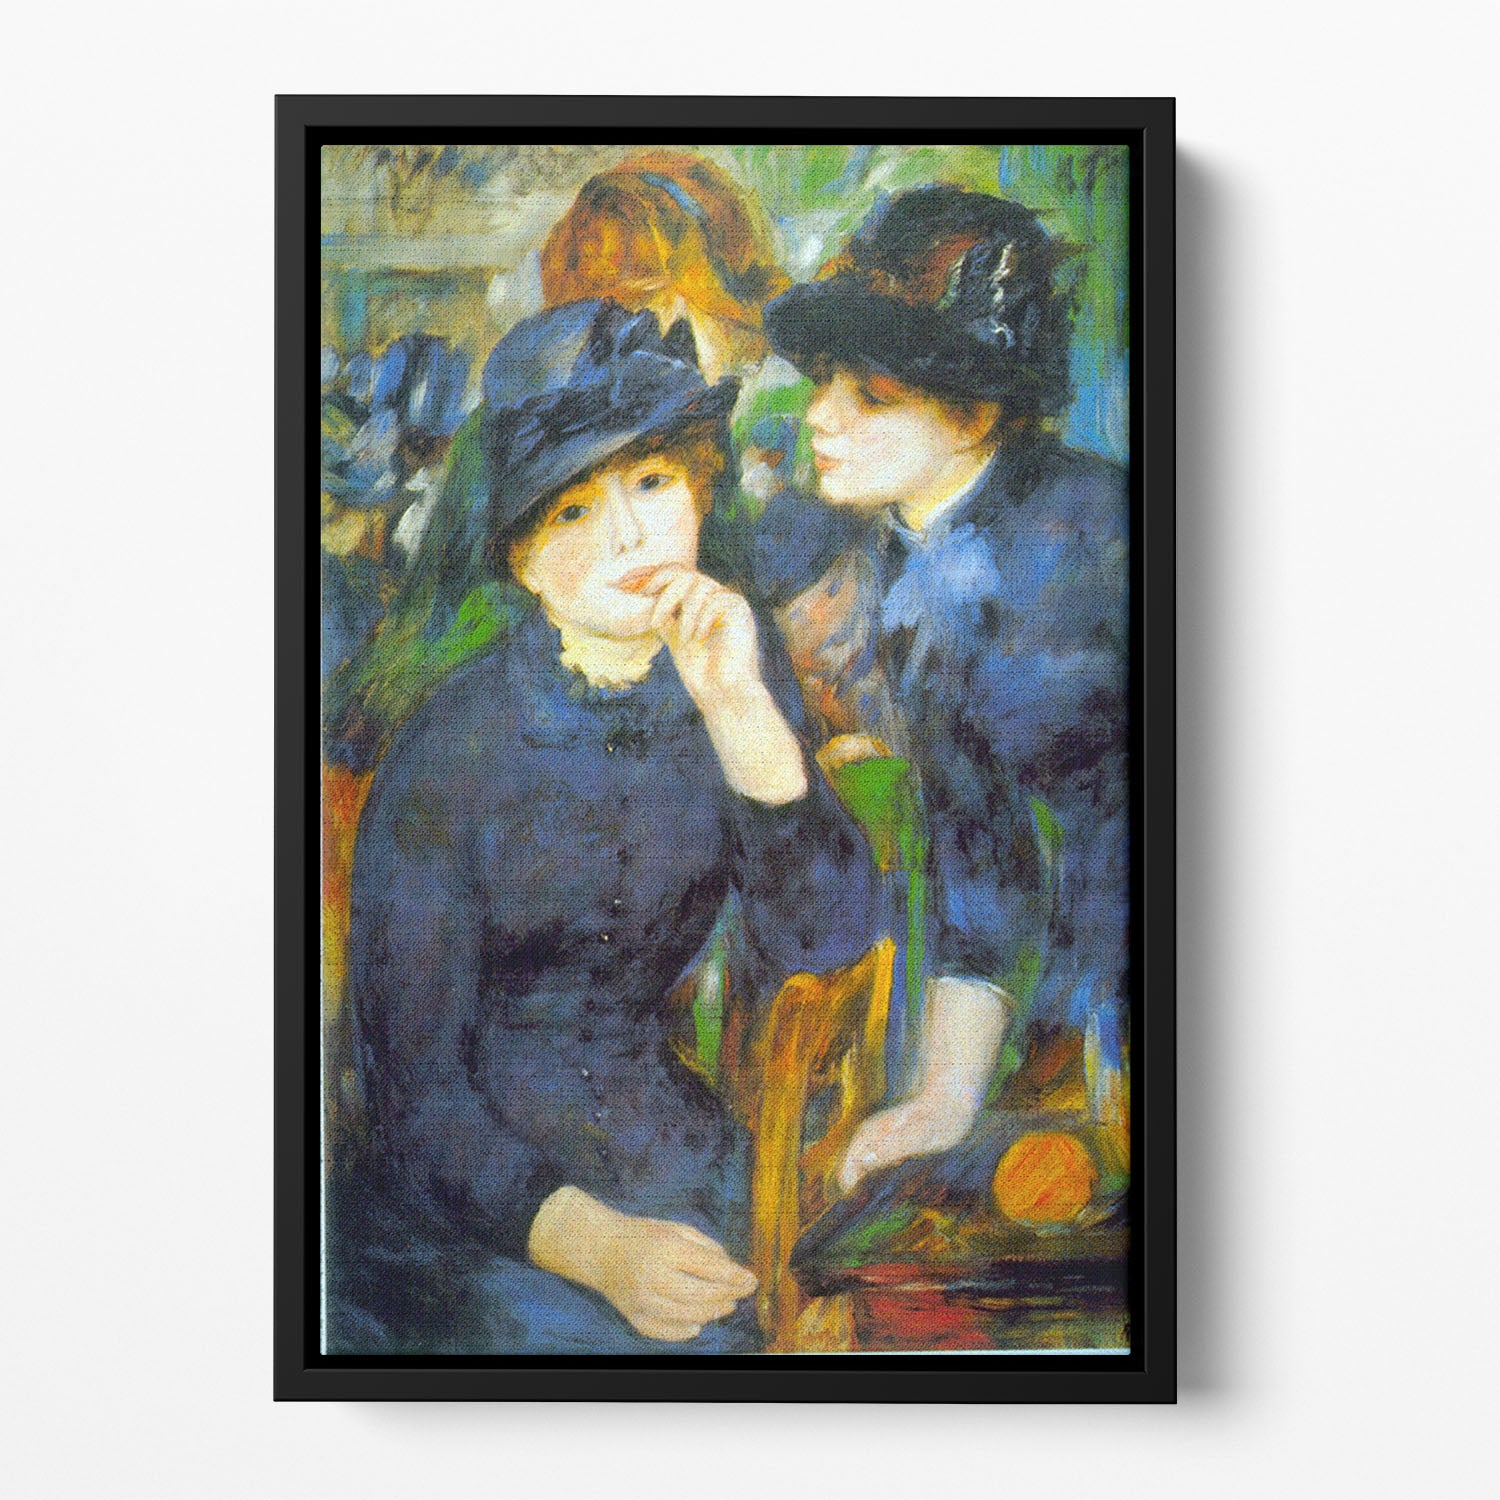 Two Girls by Renoir Floating Framed Canvas